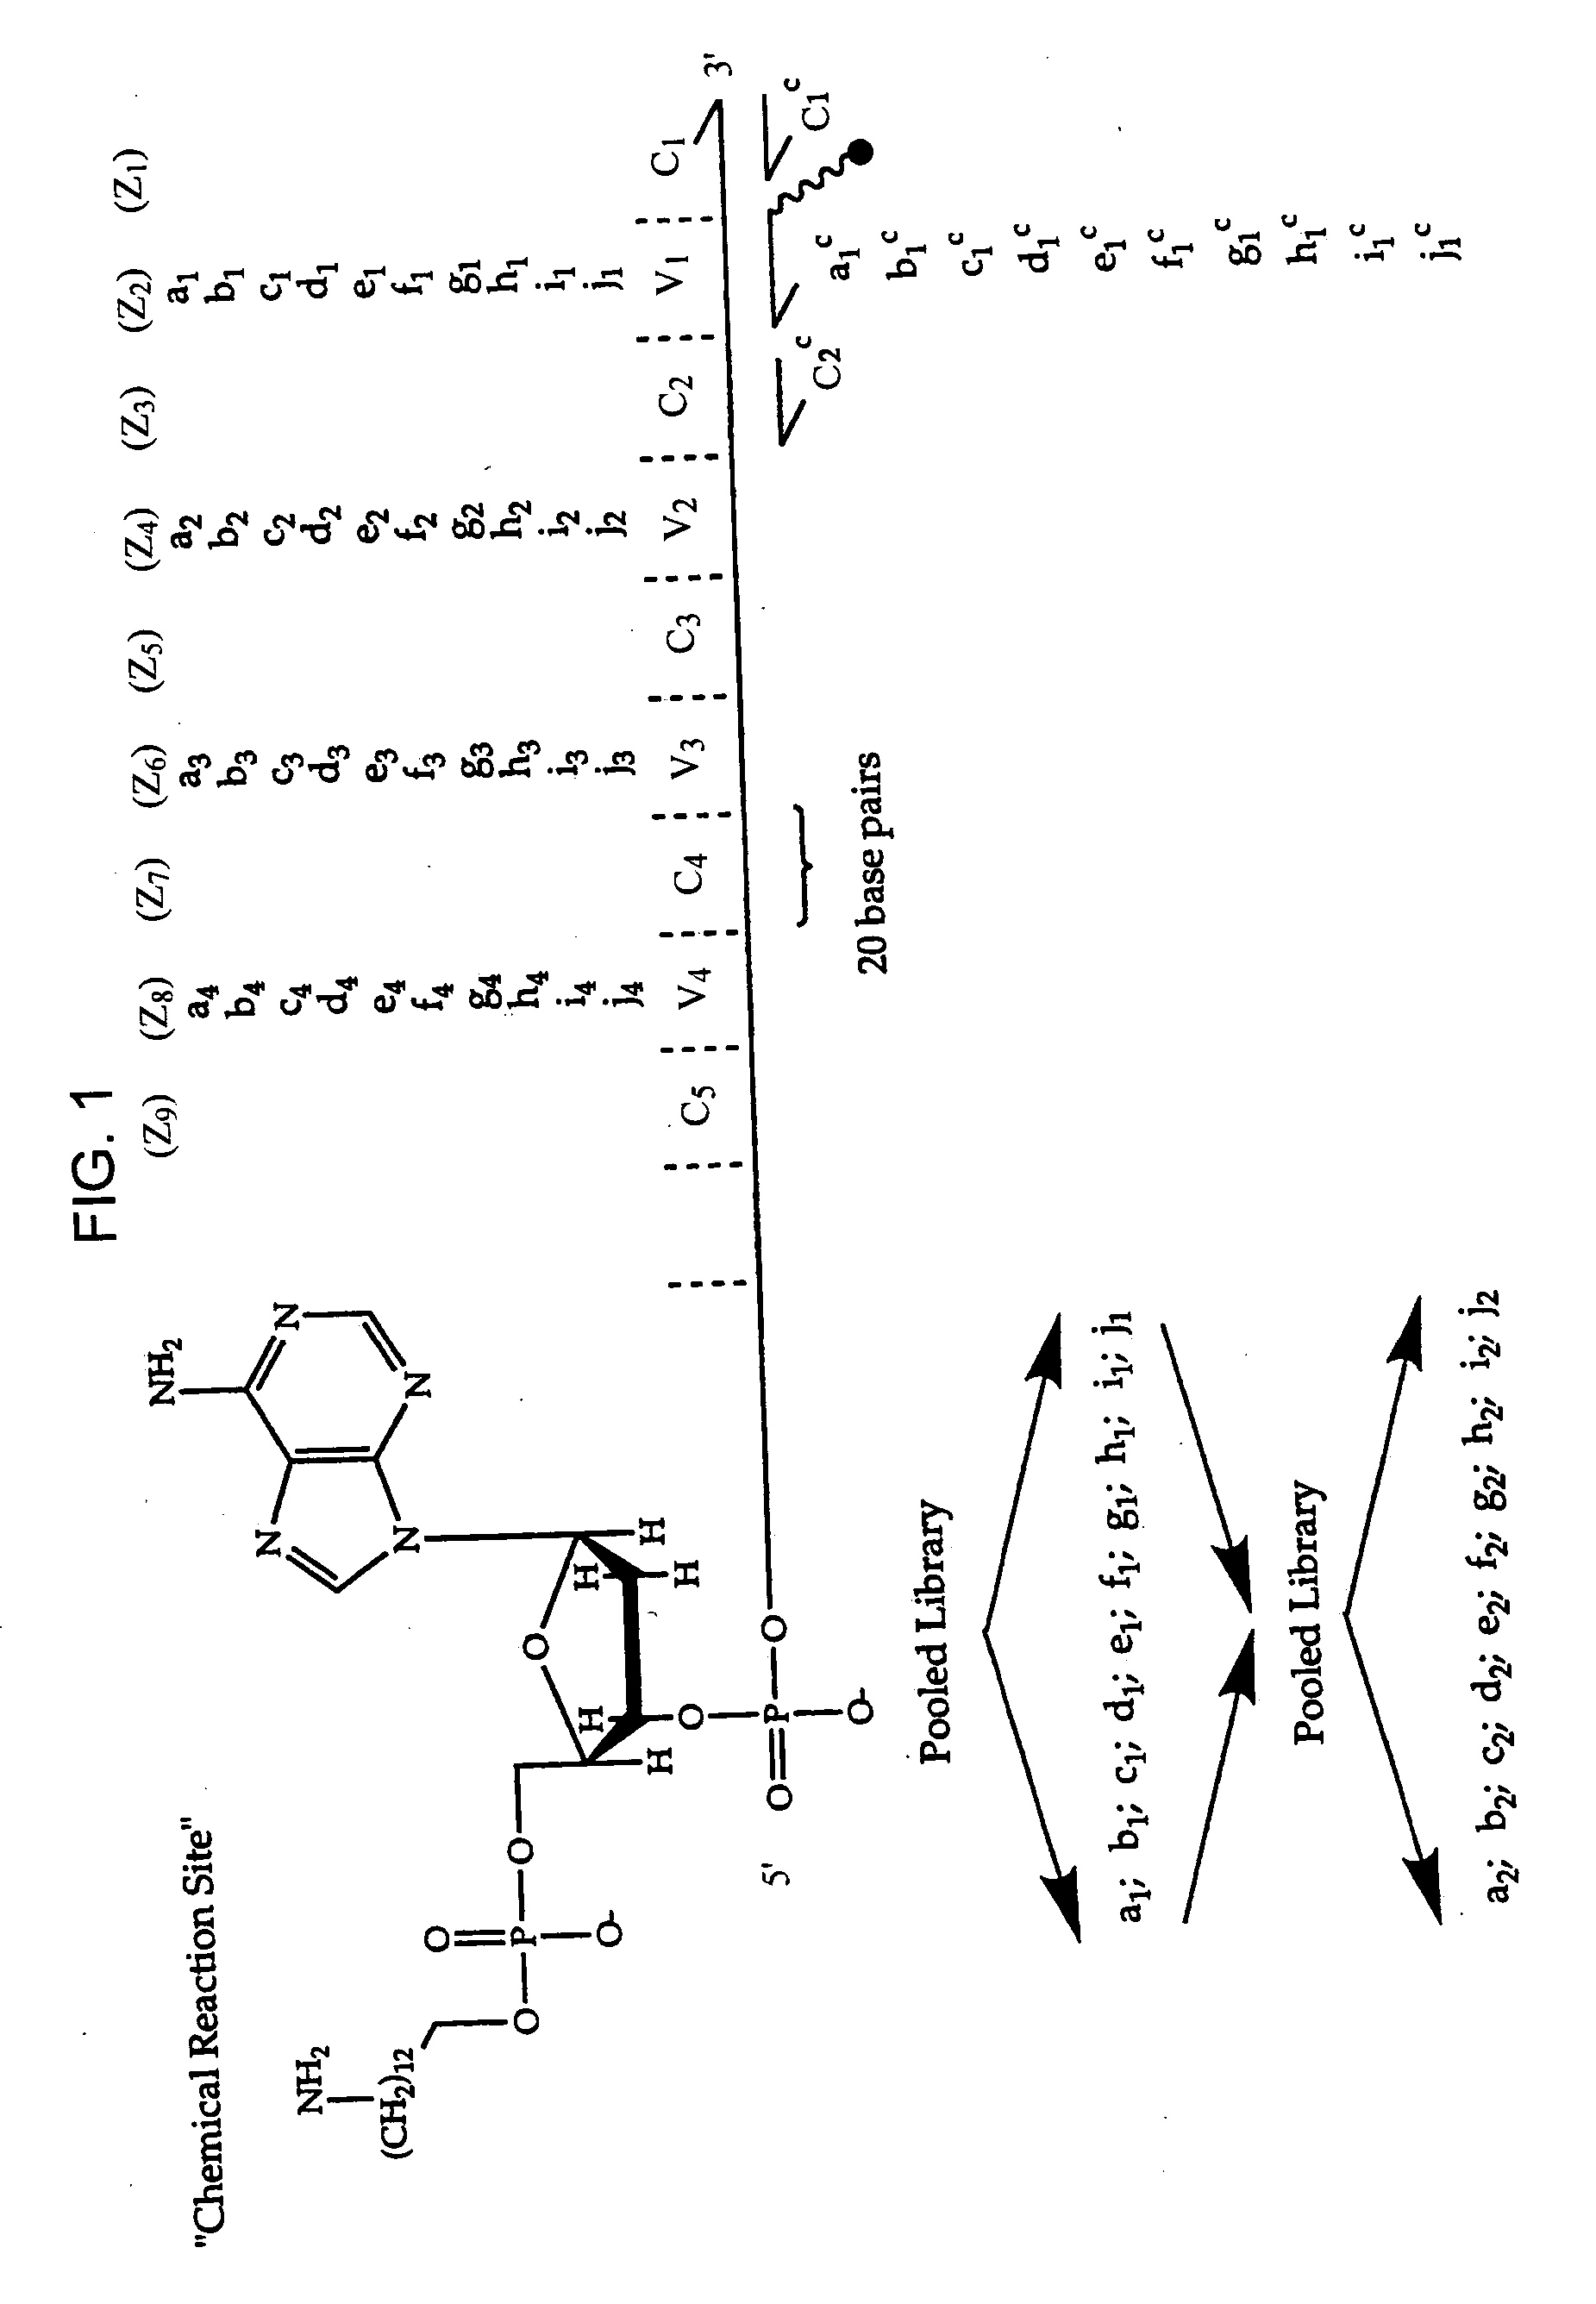 DNA-templated combinatorial library device and method for use